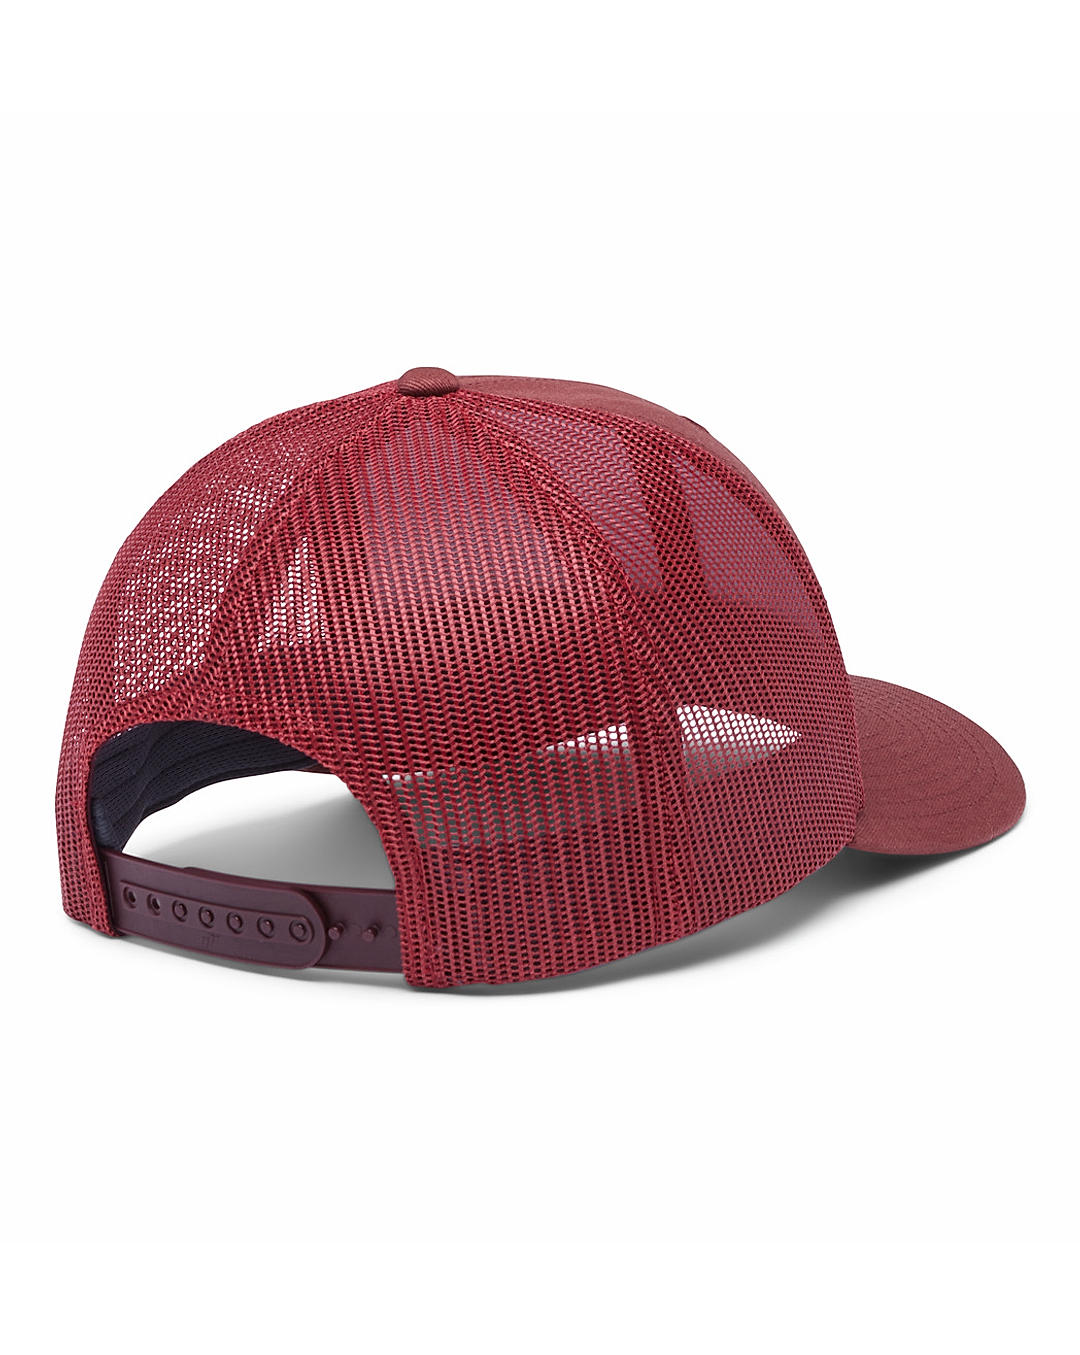 Columbia Unisex Red Columbia Mesh Snap Back - High